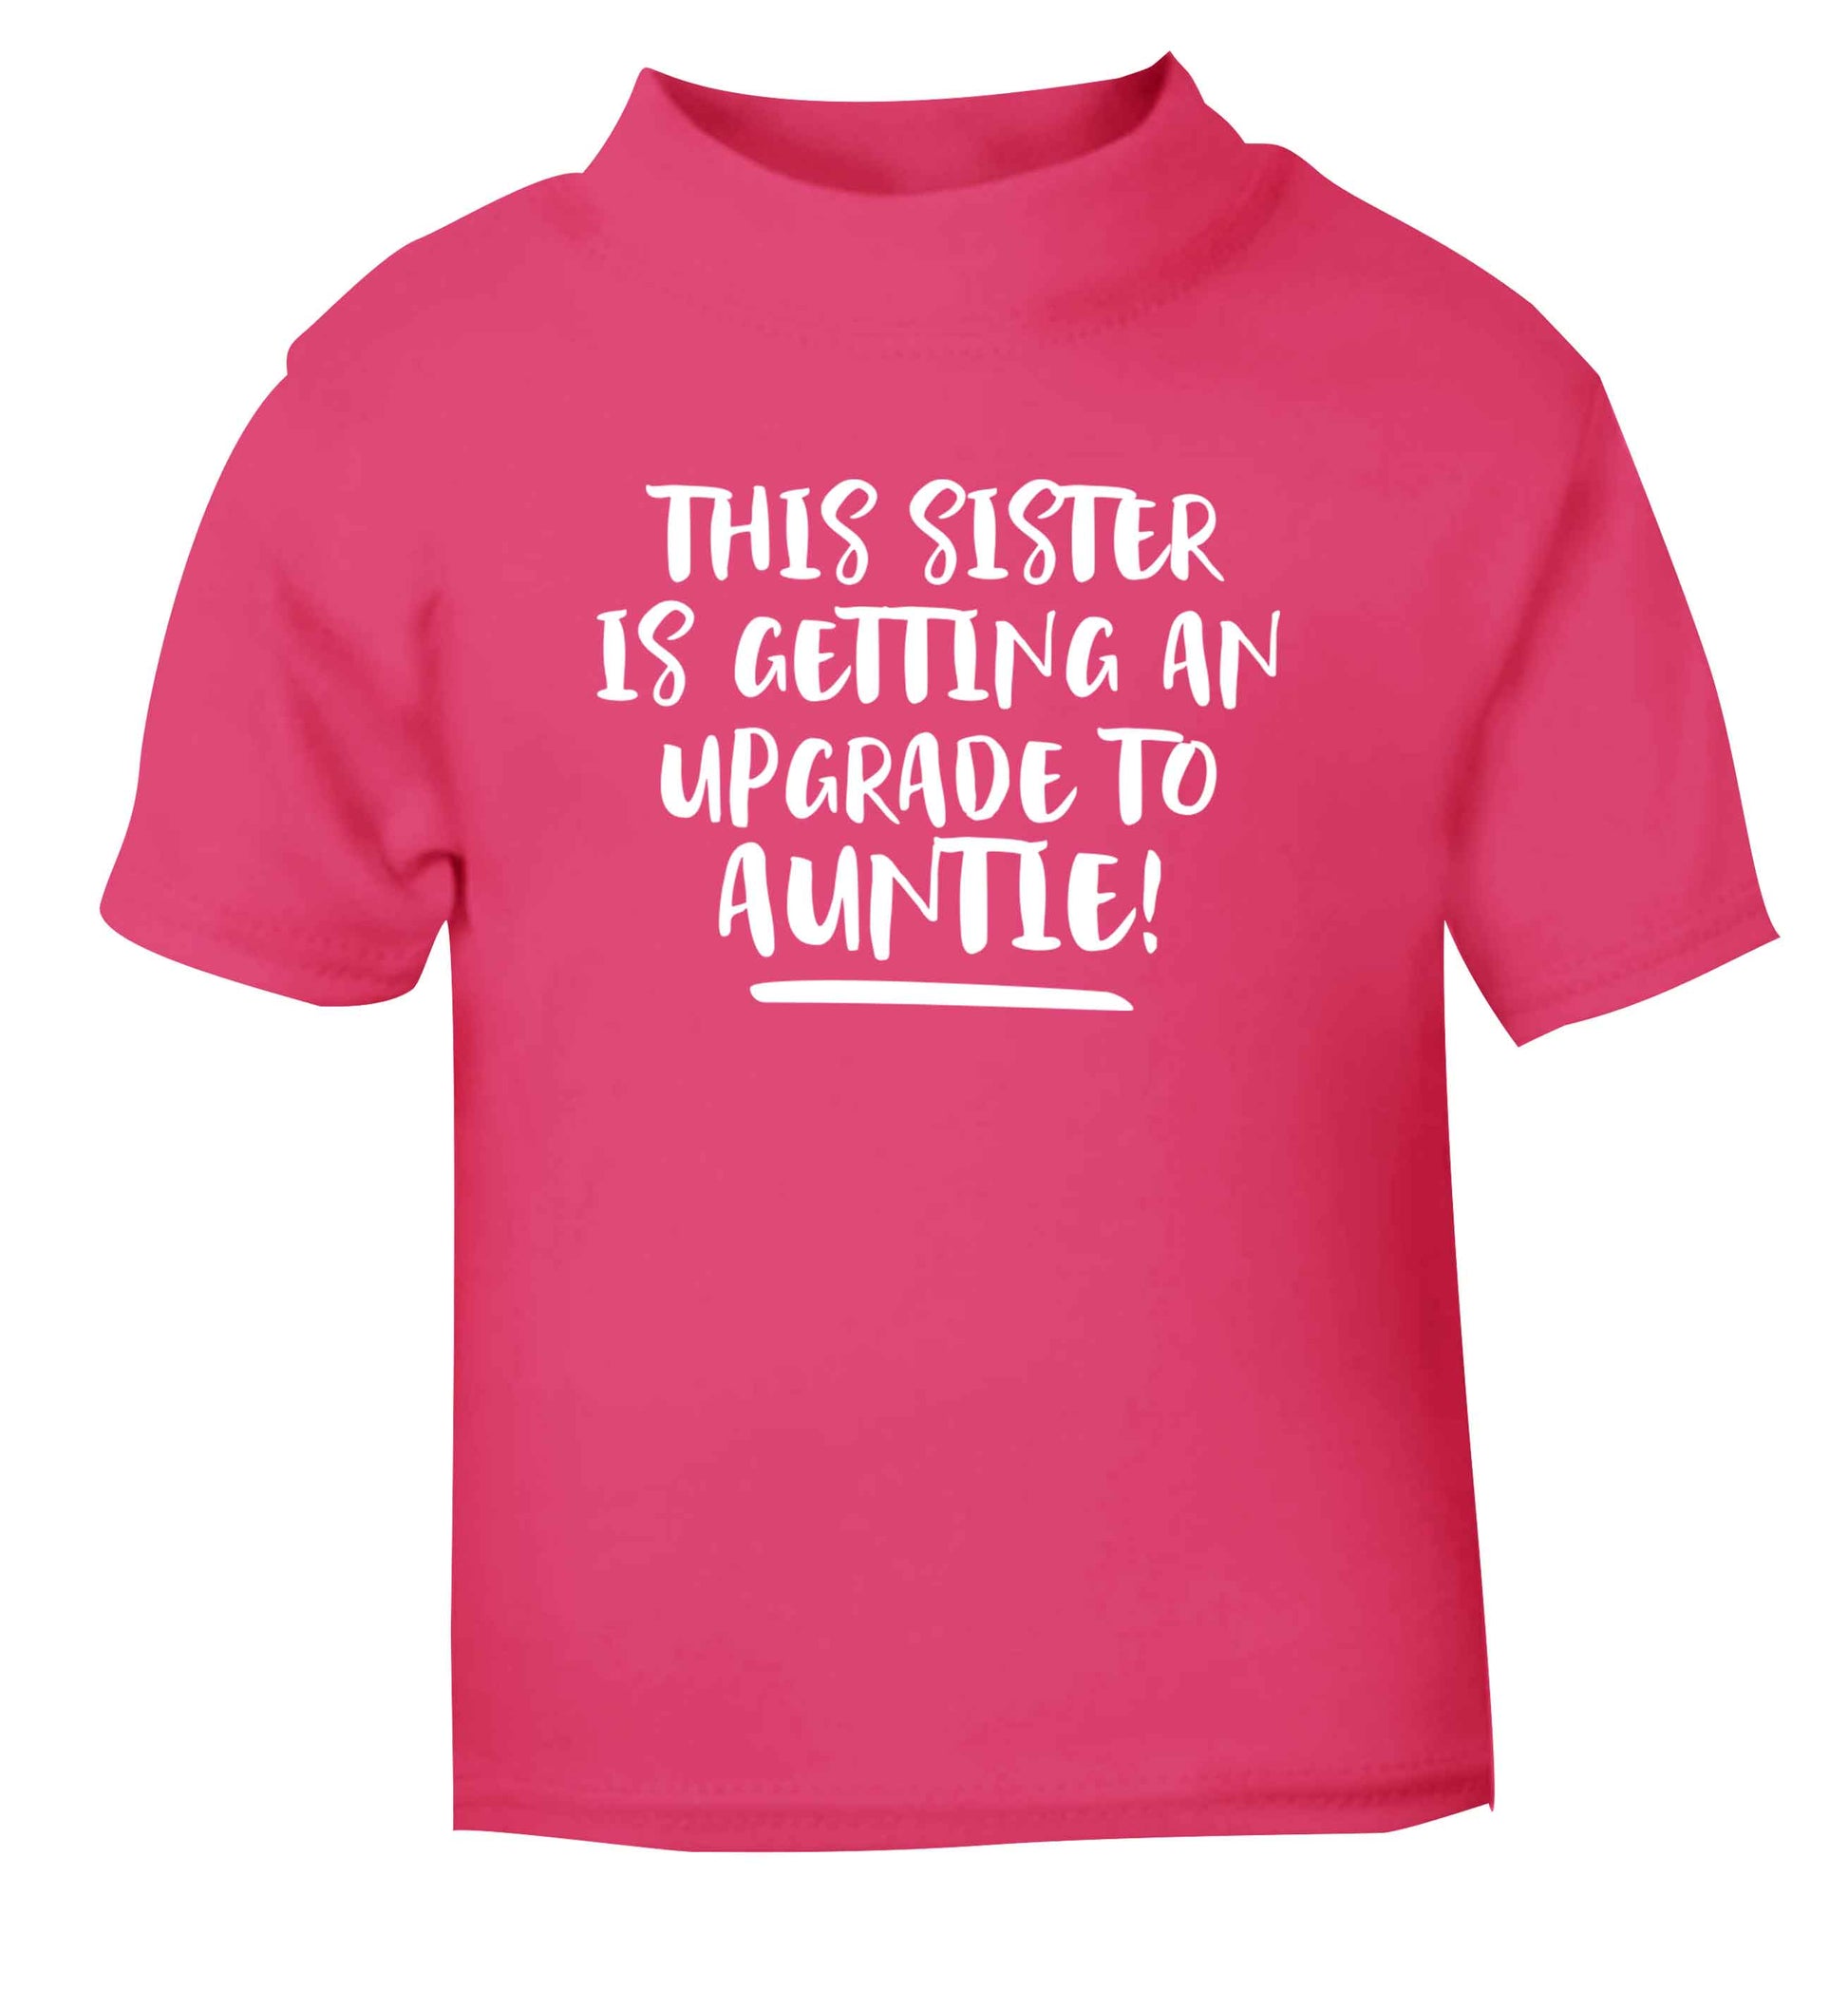 This sister is getting an upgrade to auntie! pink Baby Toddler Tshirt 2 Years